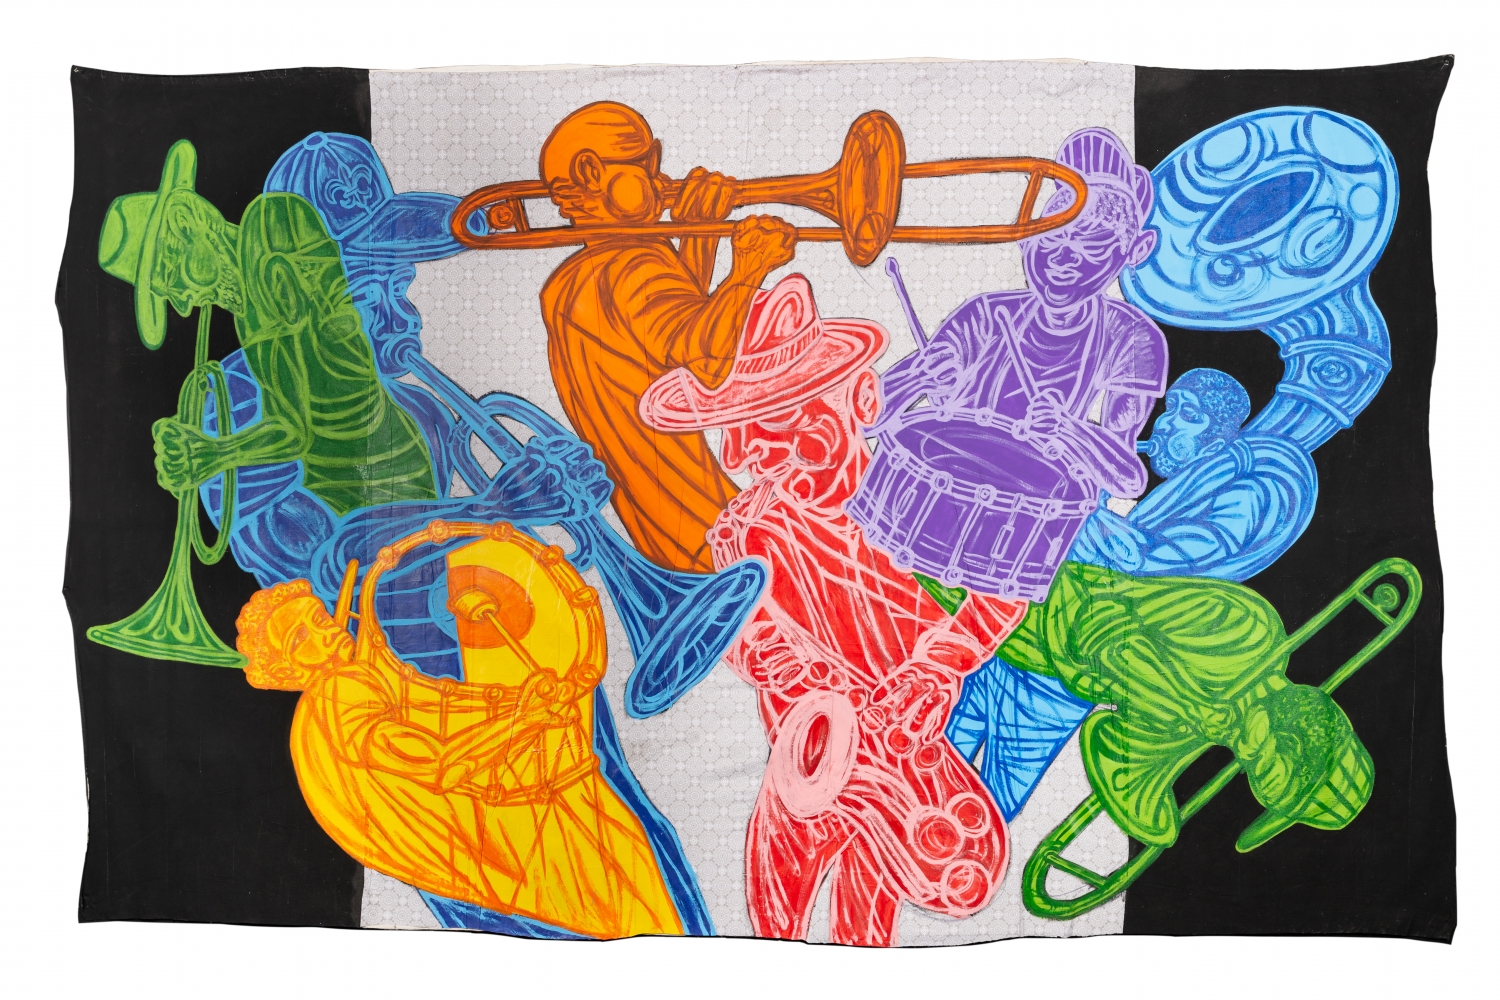 Brass Band on Frenchman Street 3, 2020&amp;nbsp;

Acrylic on Canvas&amp;nbsp;

92 x 144 inches&amp;nbsp;

&amp;nbsp;